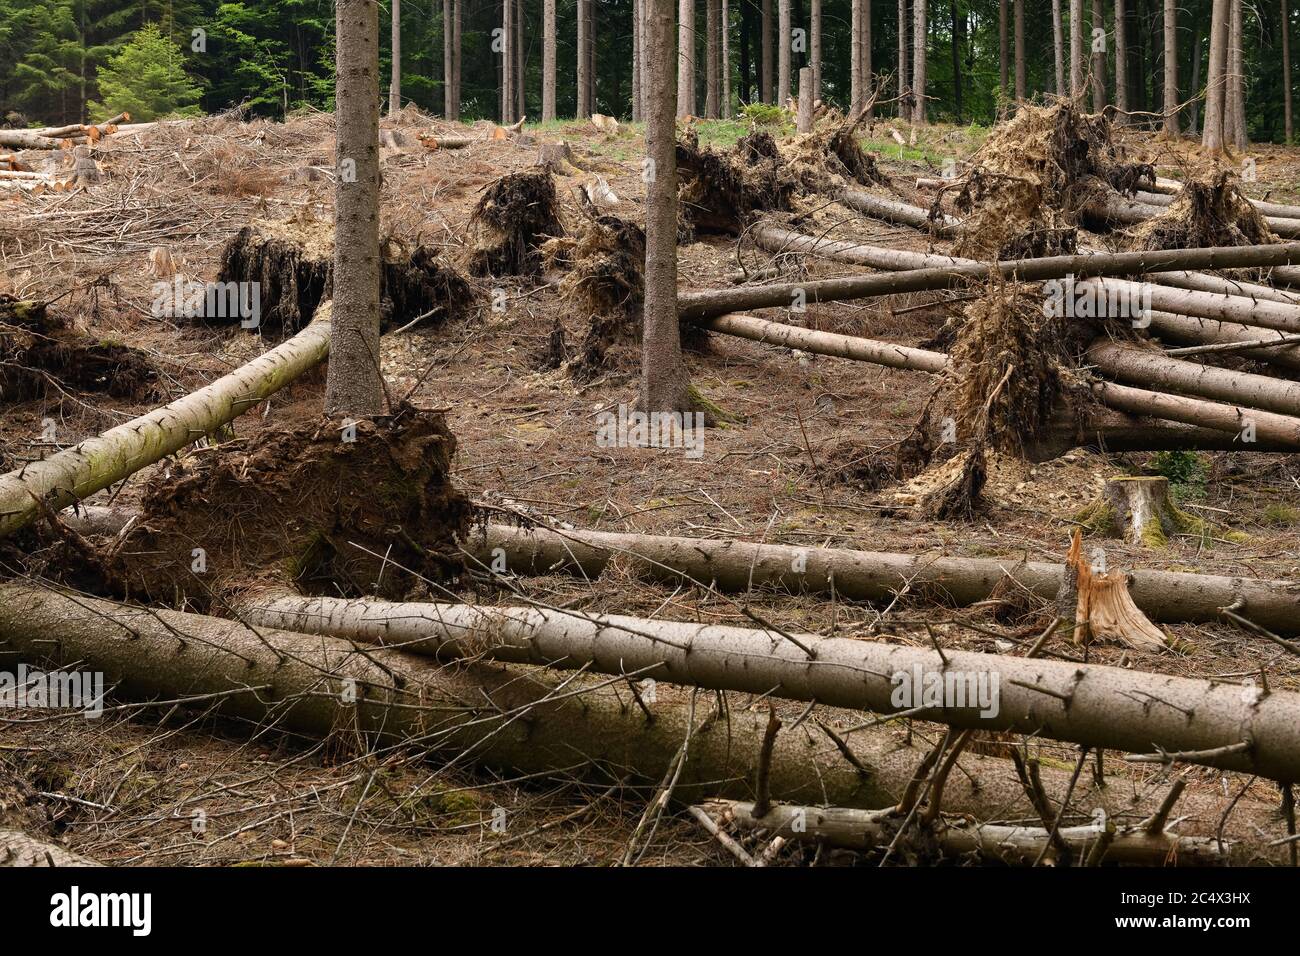 Fallen trees, uprooted spruces after strong winds, storm damages next to a clear cutted area due to forest dieback after bark beetle attack, North Rhi Stock Photo